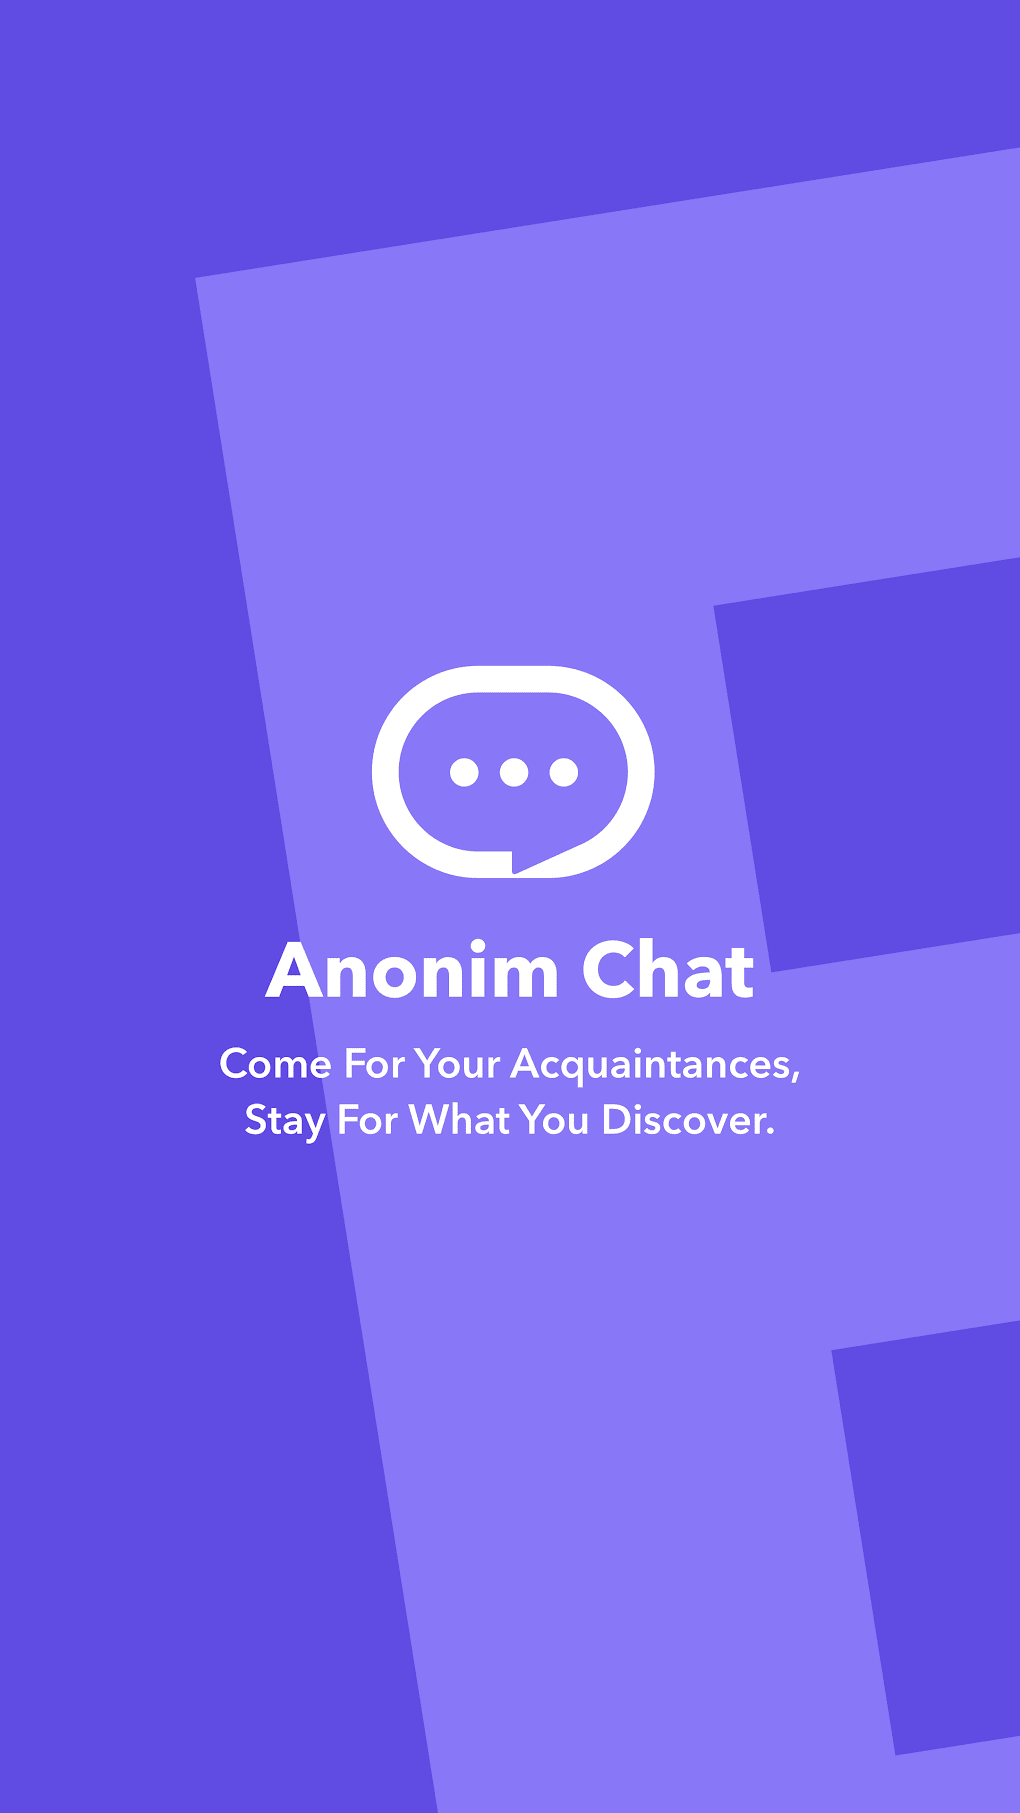 Anonymus chat